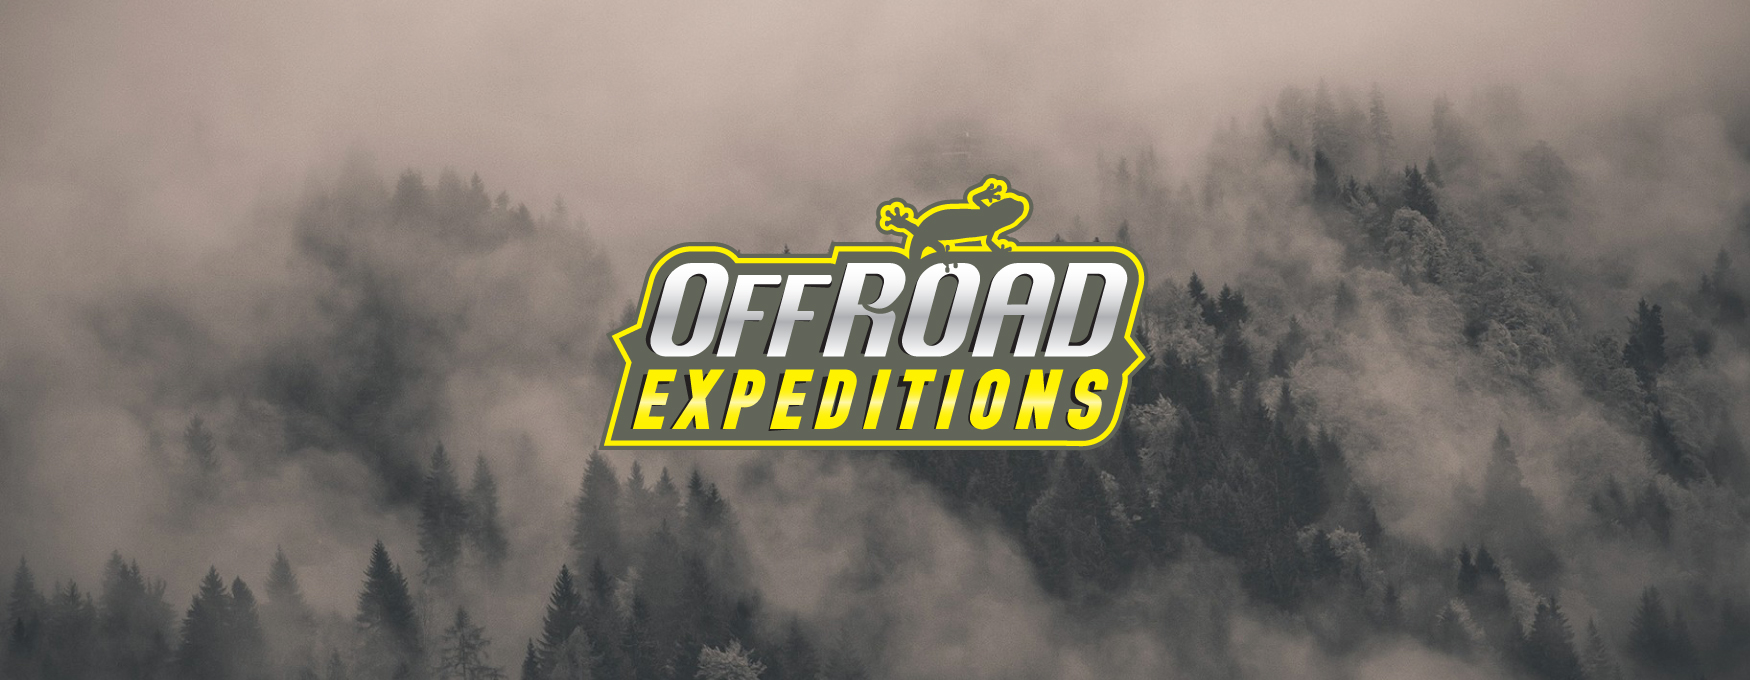 offroad-expeditions-logo